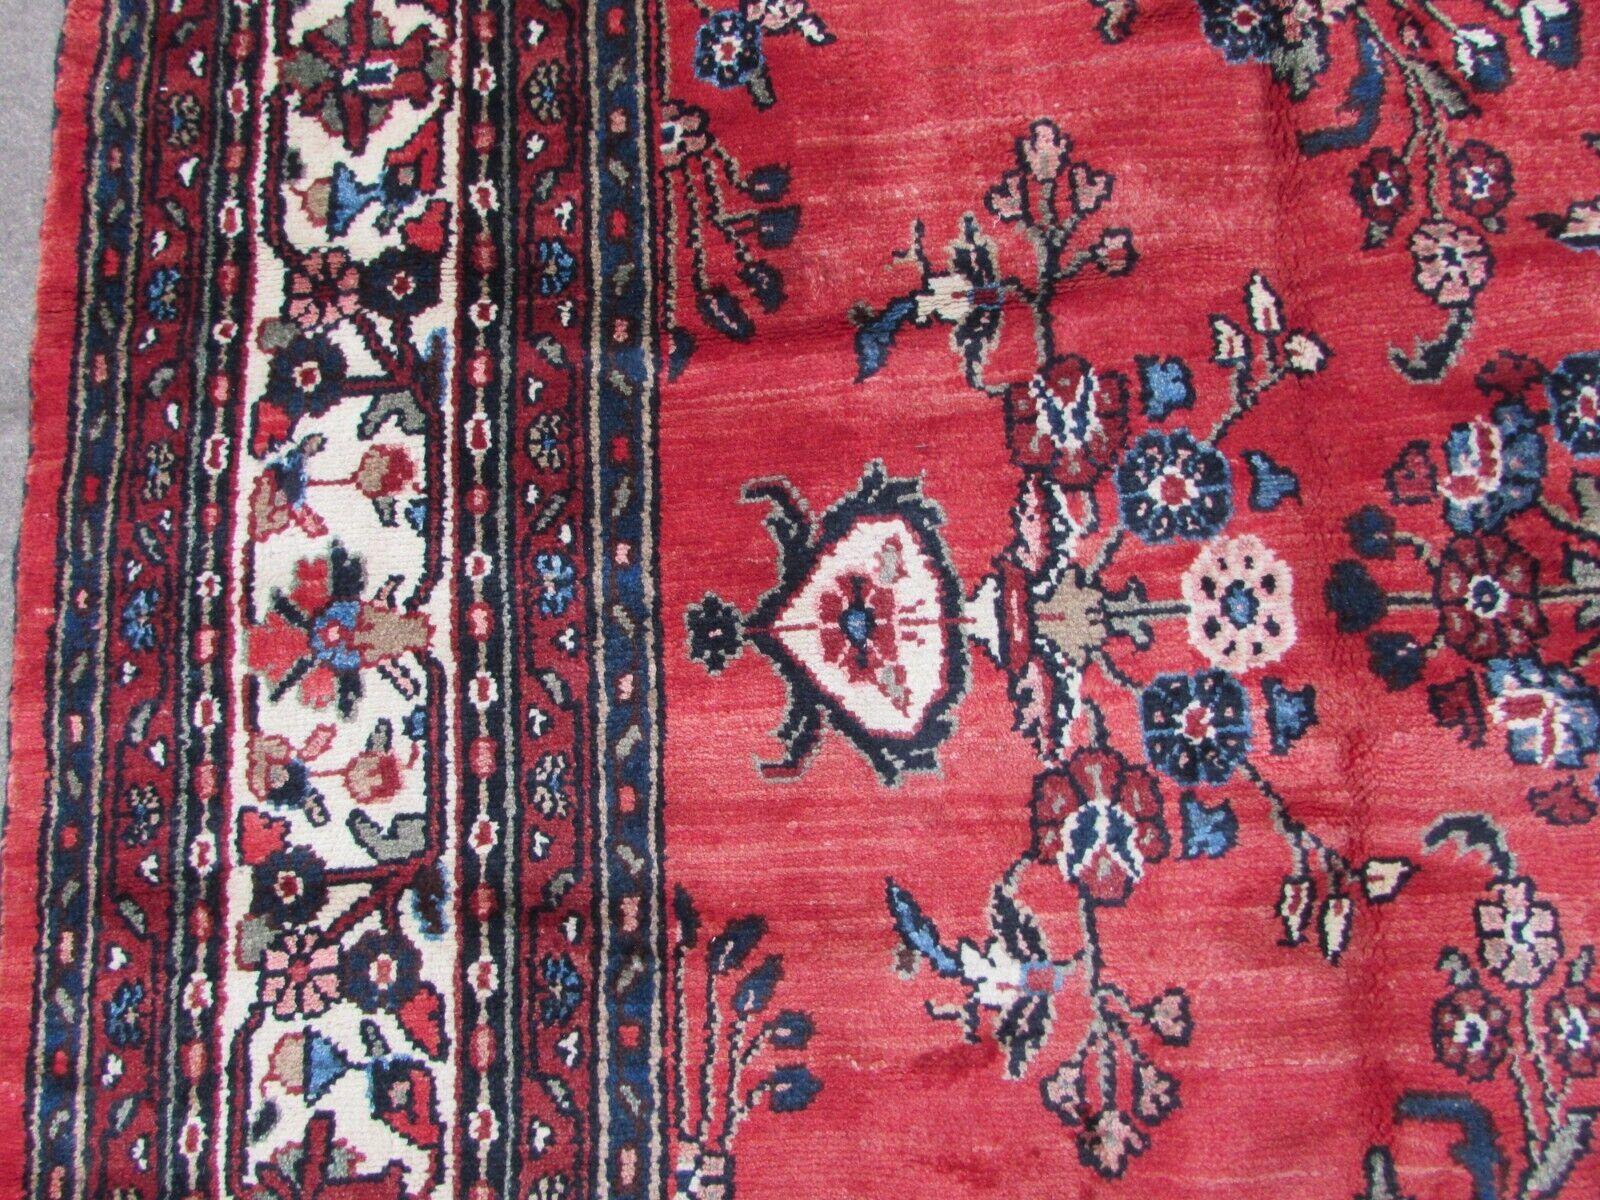 Wool Handmade Vintage Persian Style Malayer Oversize Rug 10.2' x 16.4', 1970s, 1Q55 For Sale